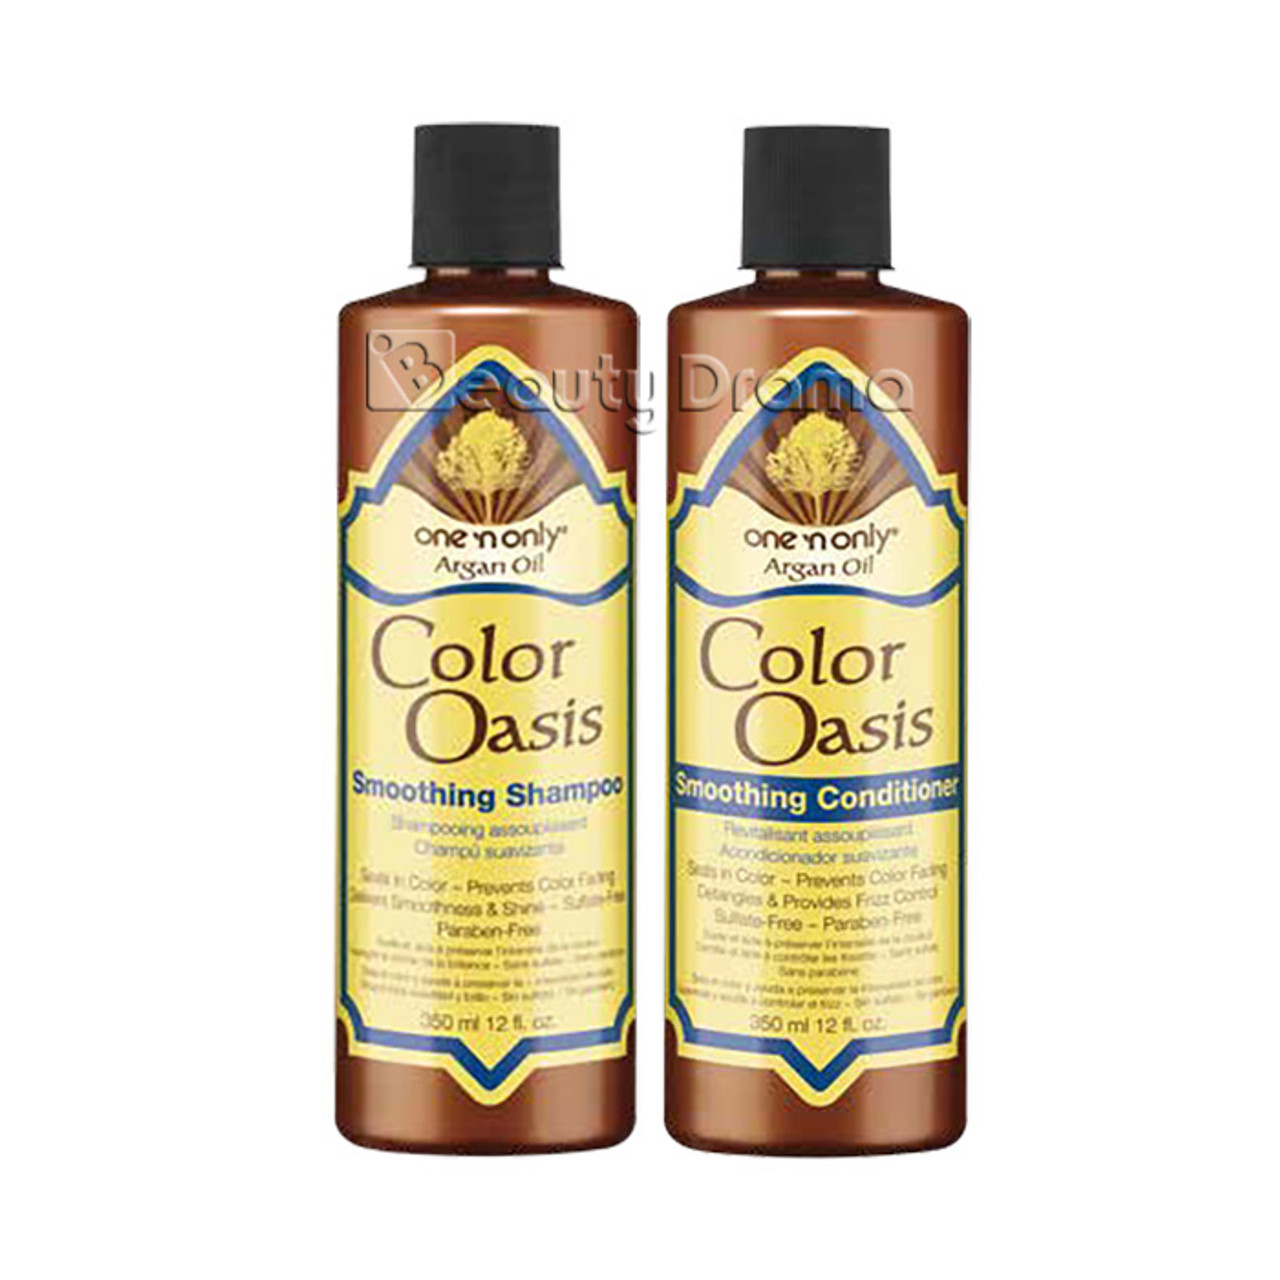 Only Argan Oil Color Oasis Smoothing Shampoo Conditioner